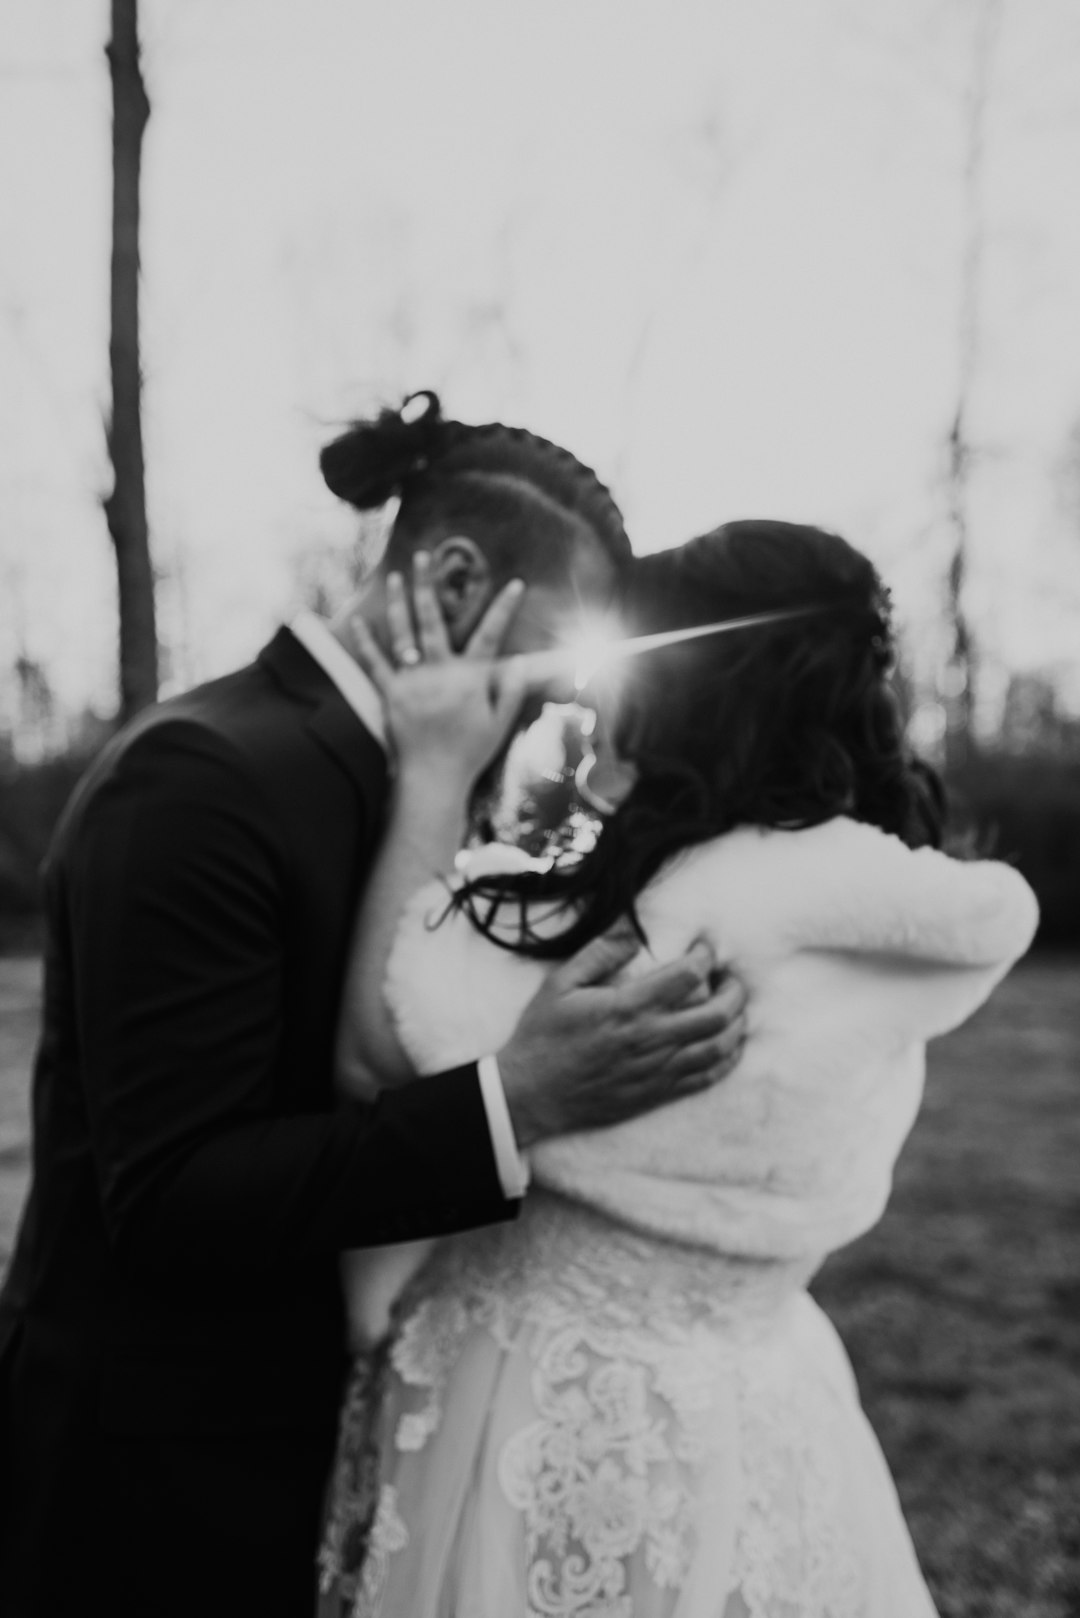 man in black suit kissing woman in white sweater